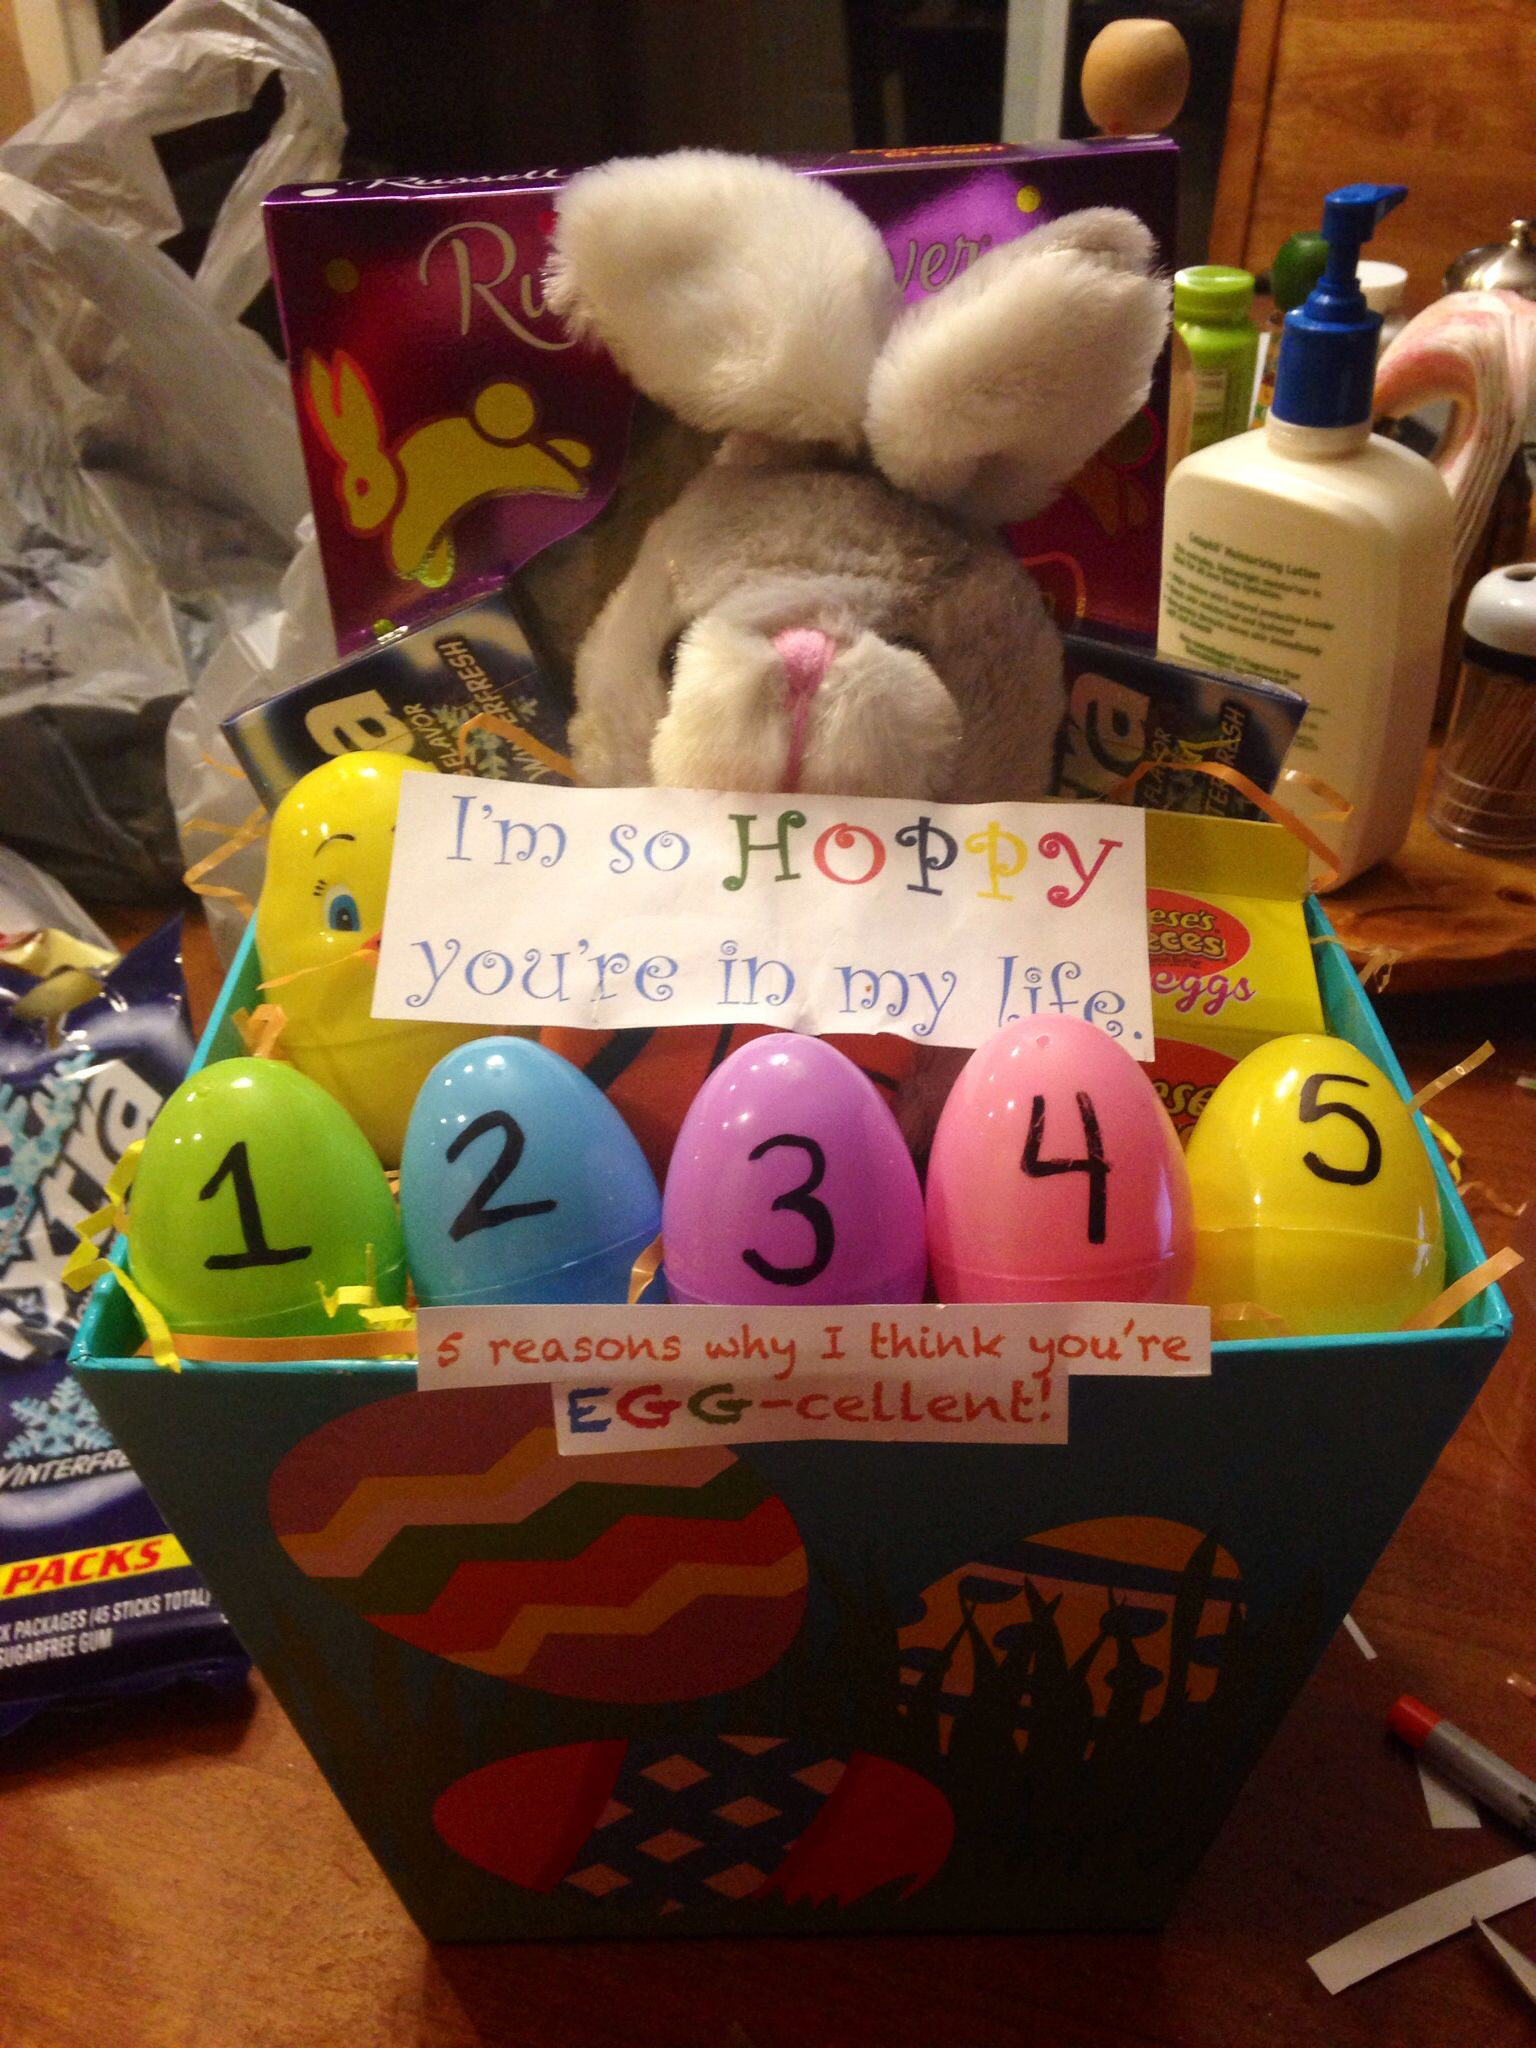 Easter Gifts For Wife
 Easter Basket for girlfriend boyfriend "I m so HOPPY you